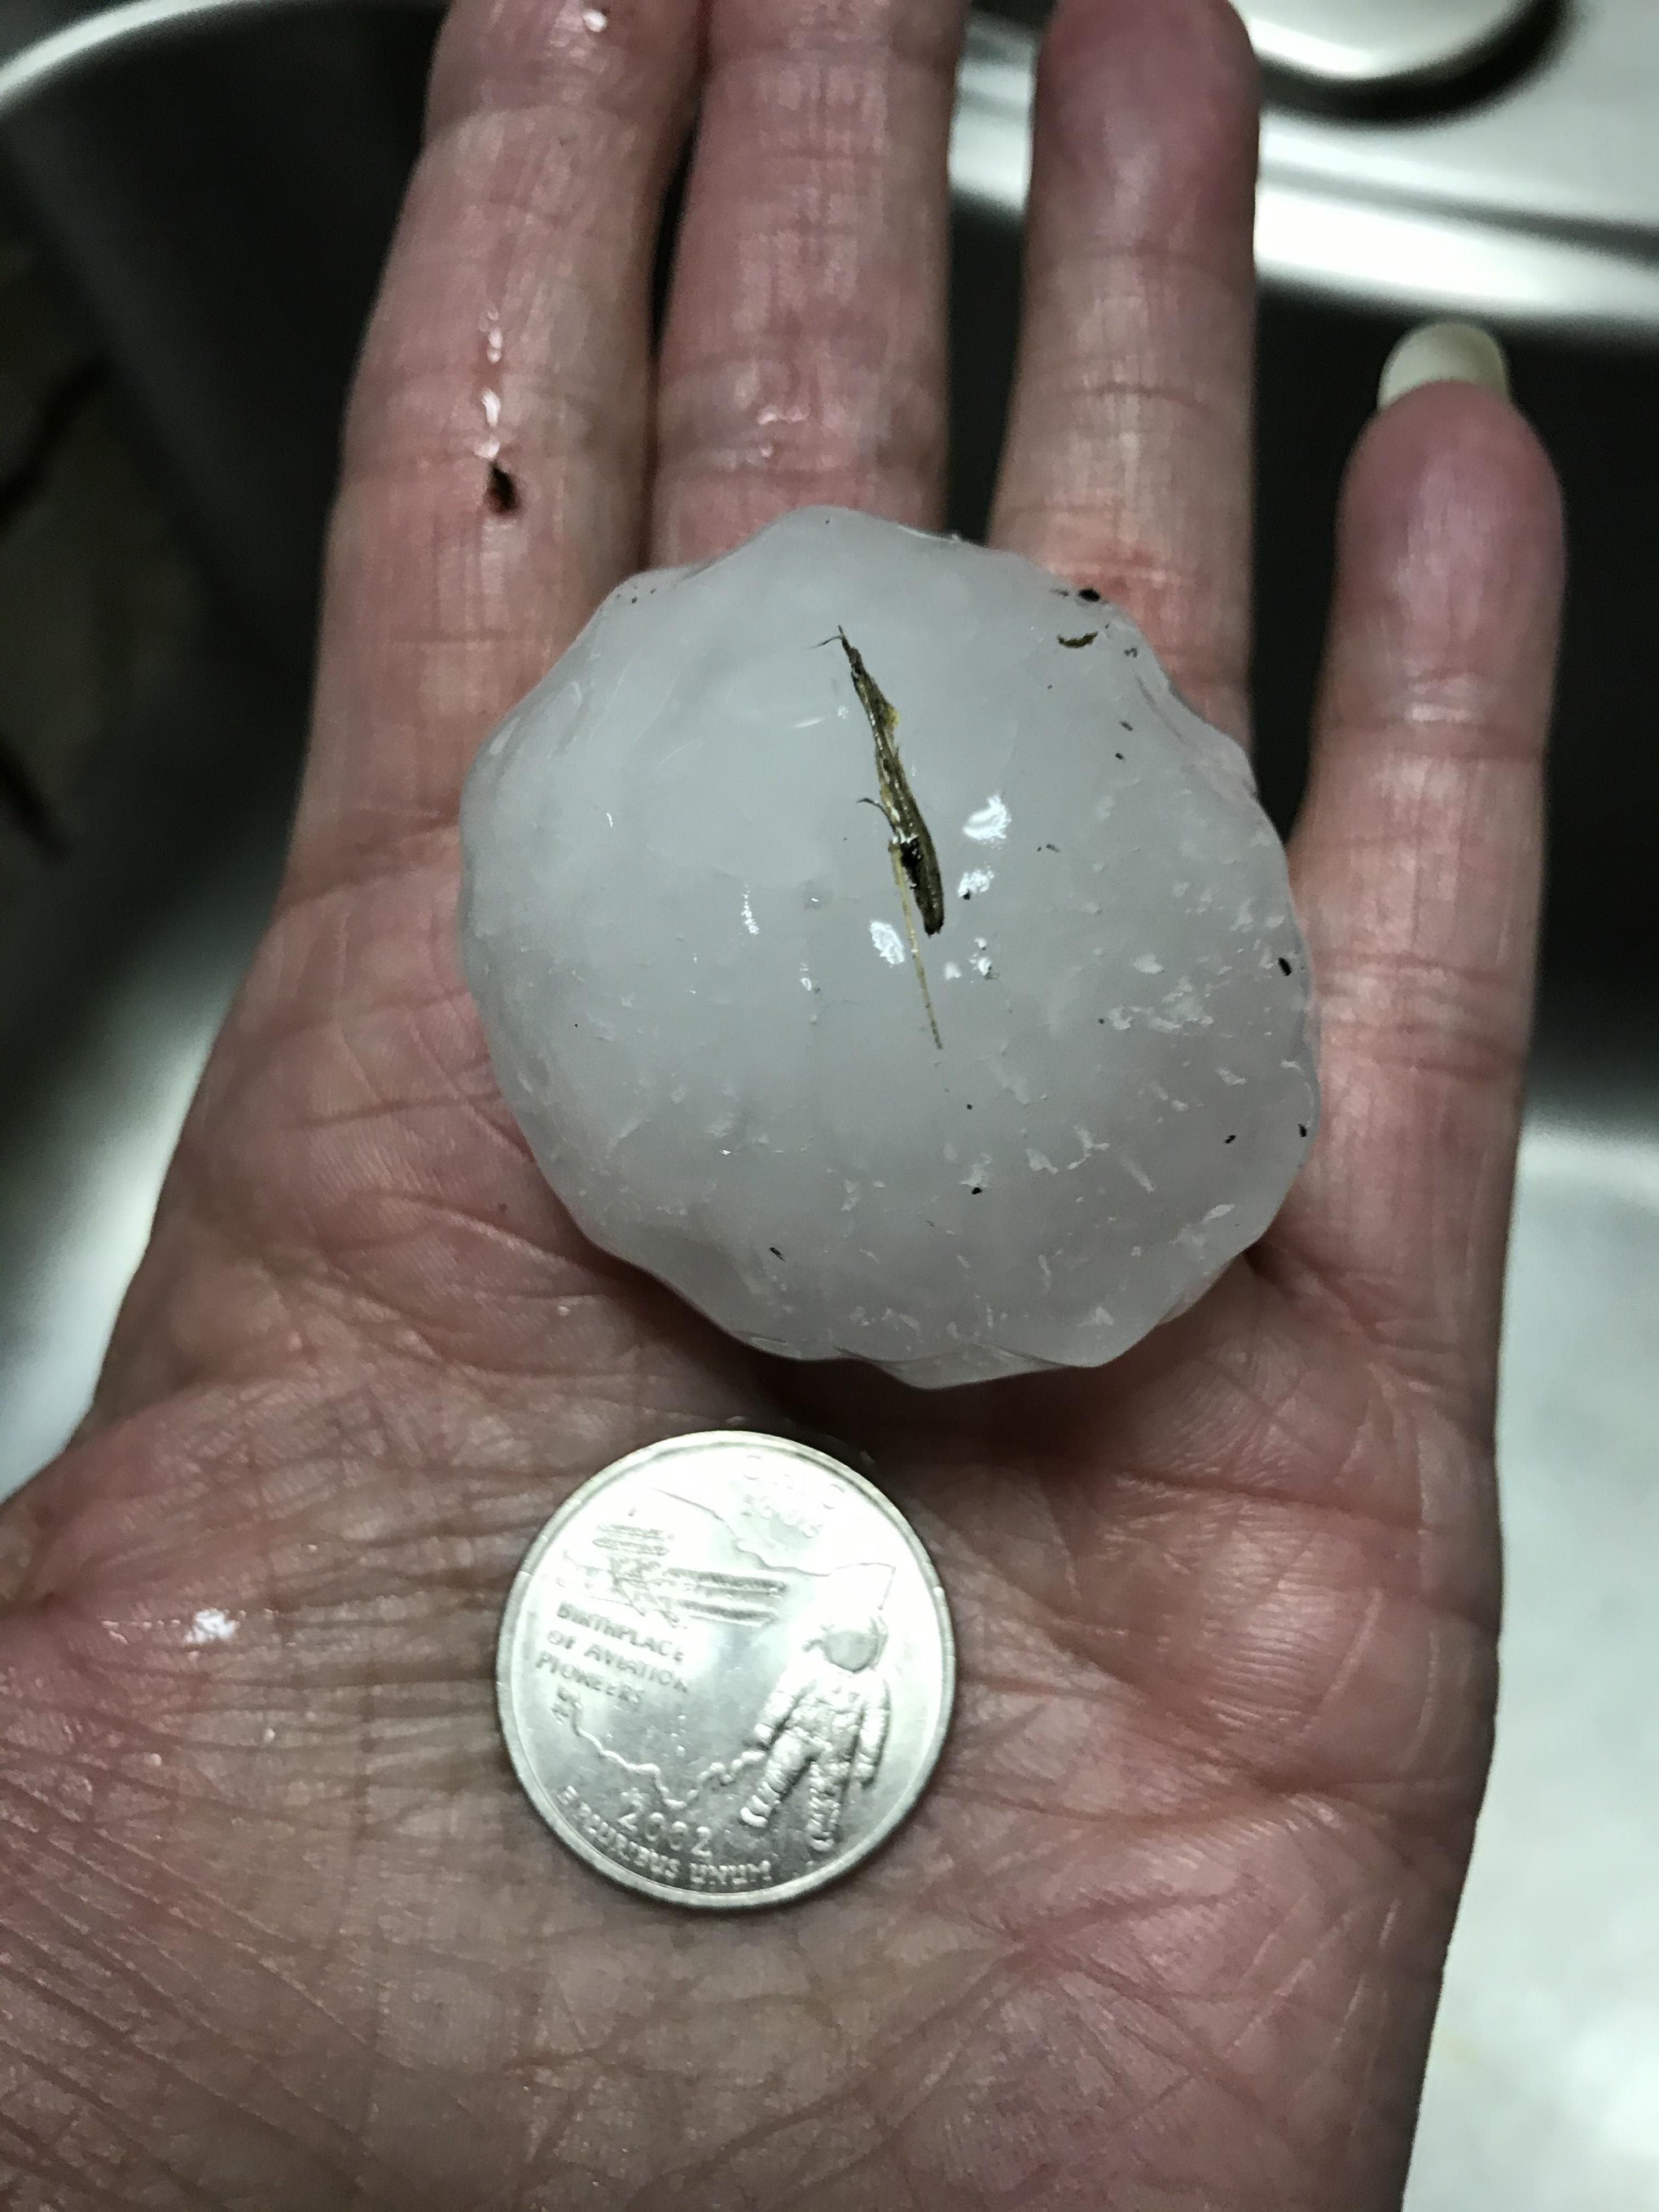 Your Pictures of Large Hail From Early Morning Storms – NBC 5 Dallas ...